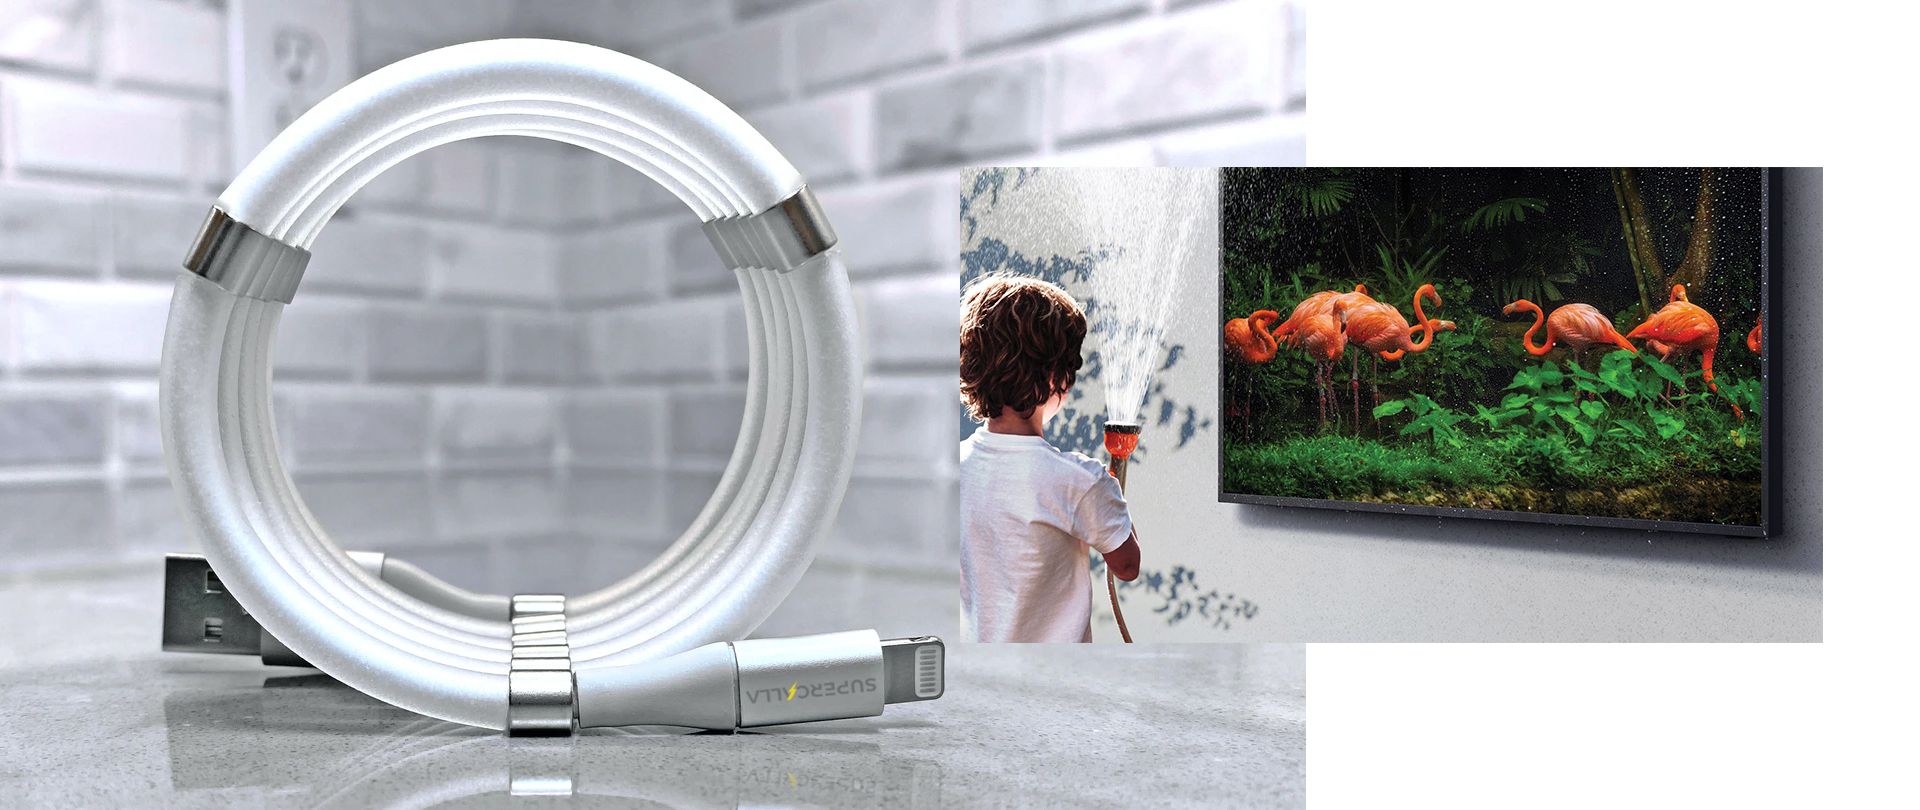 Cables That Never Tangle, Waterproof TVs And All The Miracle Tech You Need Right Now